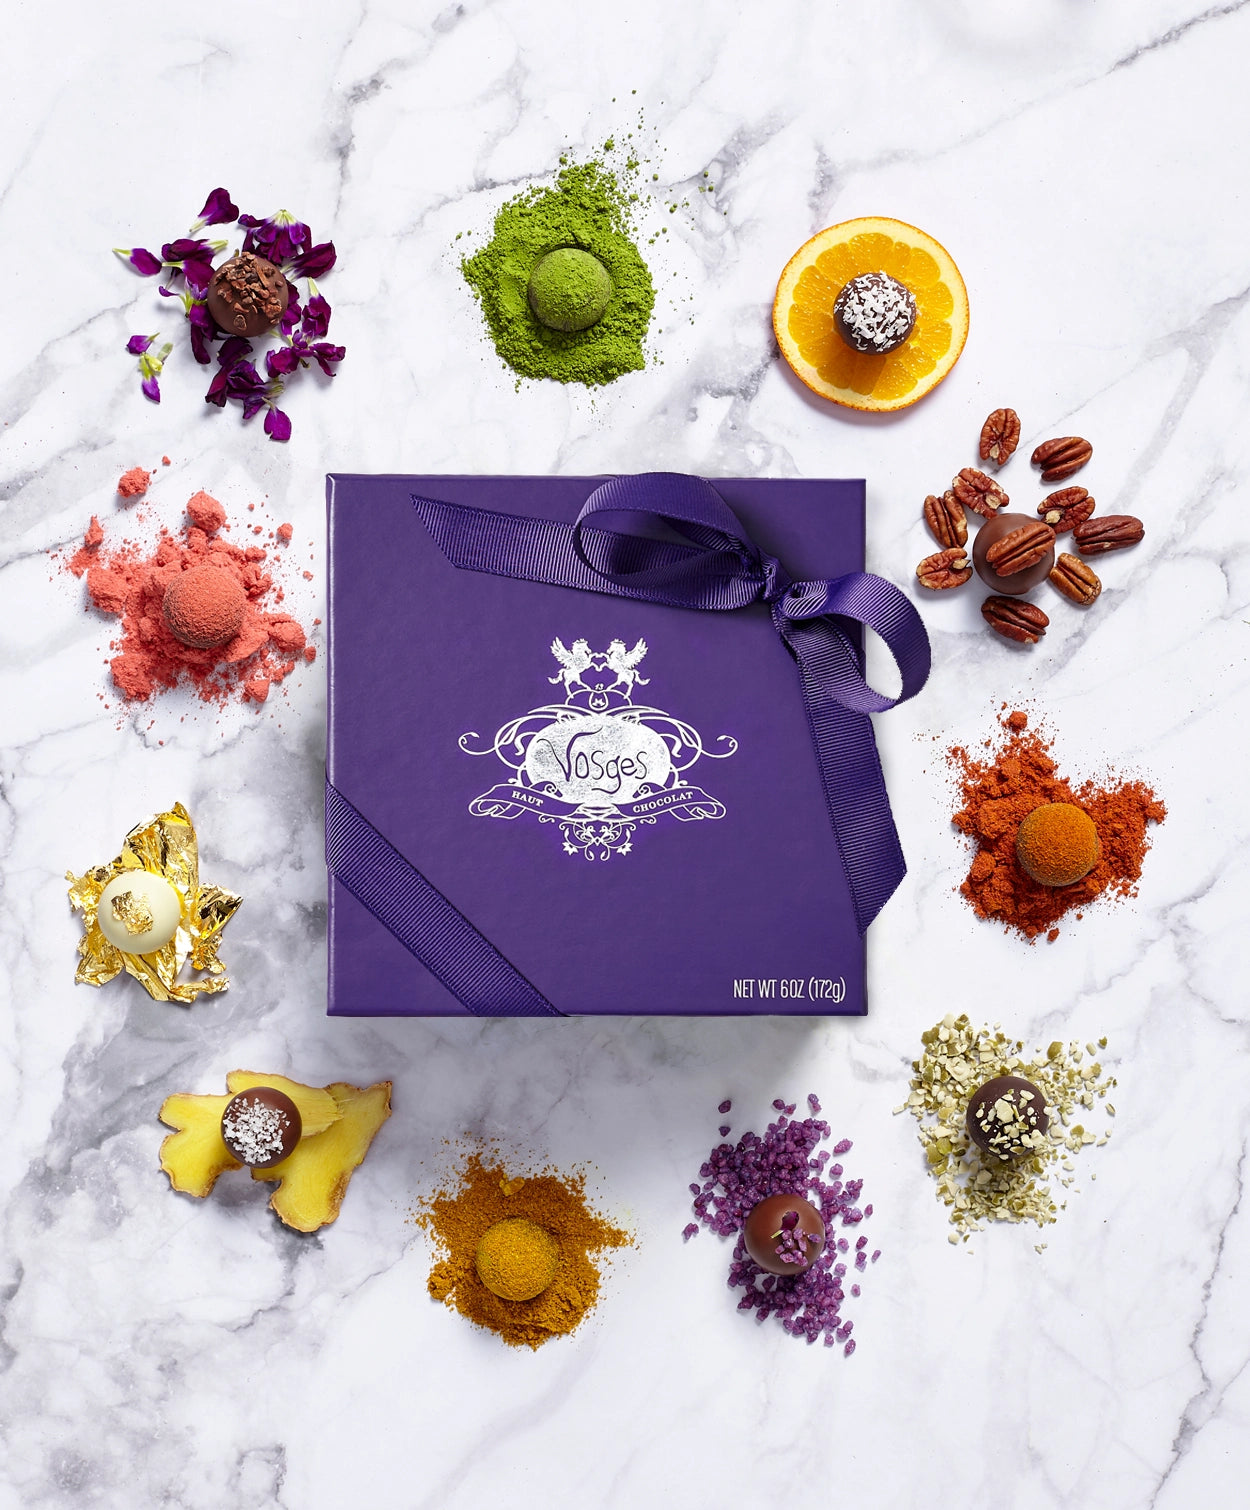 Purple Vosges Haut-Chocolat chocolate box tied with ribbon surrounded by fresh ingredients and exotic truffles on a marble slab.